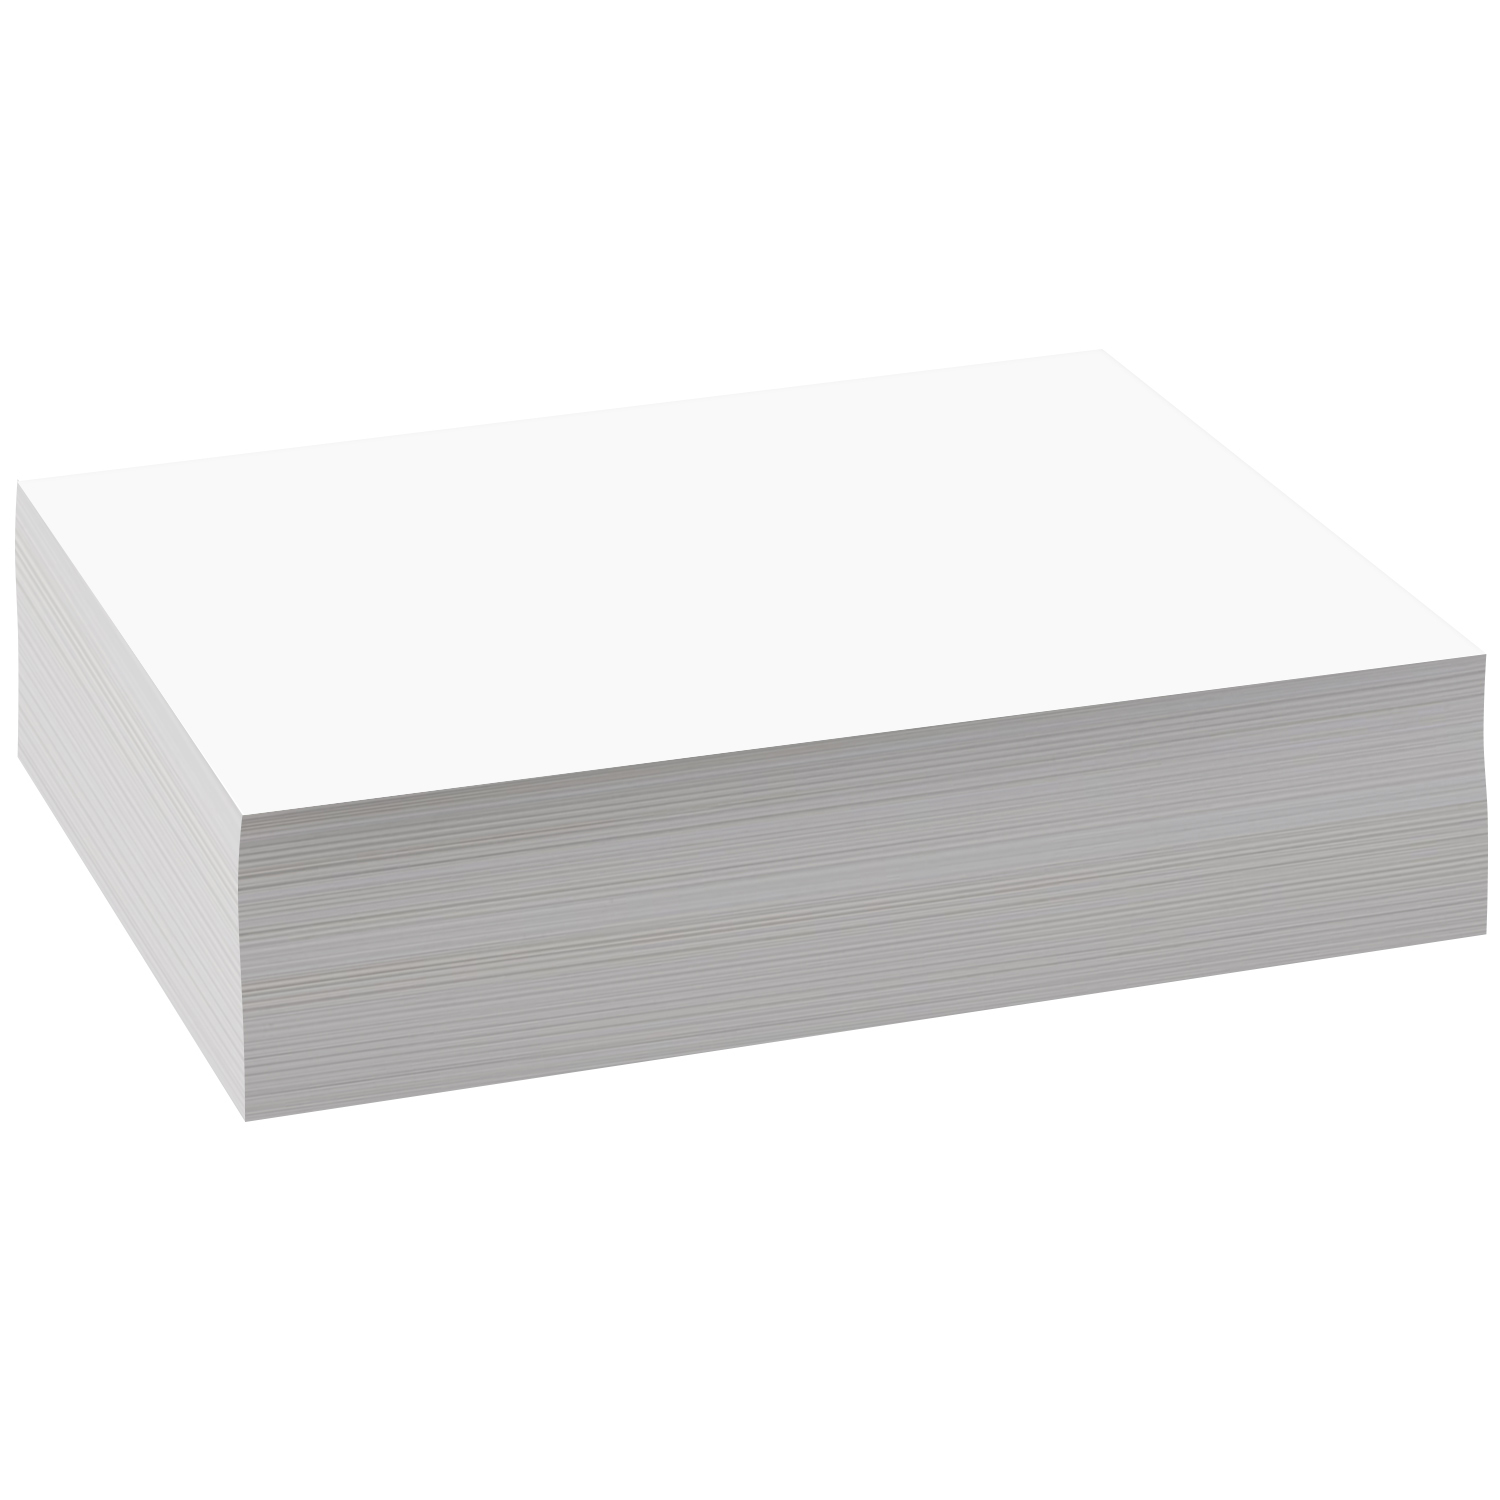 1 Case of 5000 Legal Size Paper - Bulk and Wholesale - Fine Cardstock